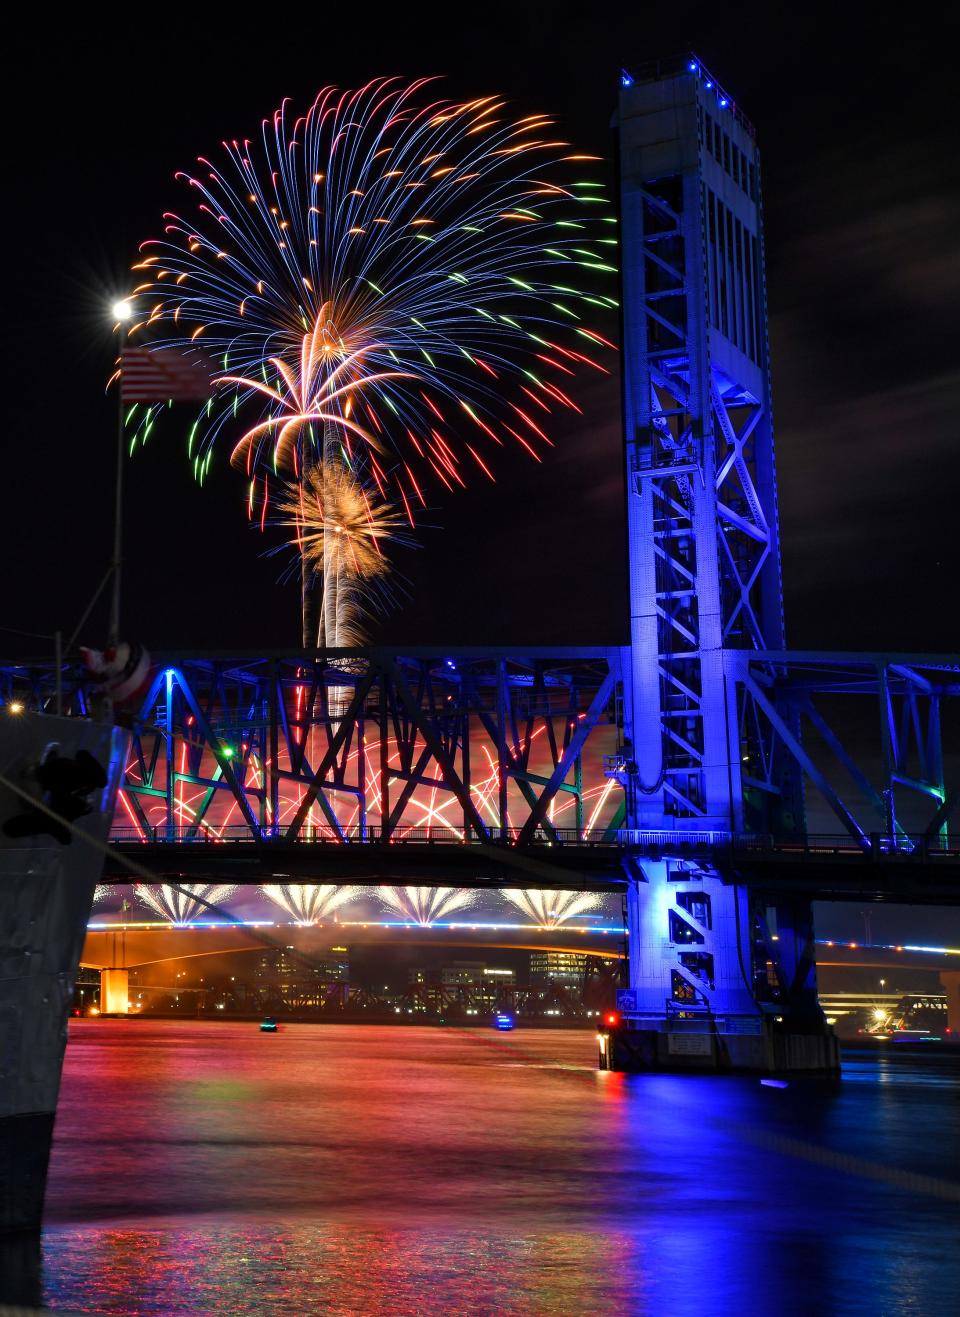 After a bit of a weather delay, the fireworks display off the Acosta Bridge wraps up Jacksonville's bicentennial celebration.